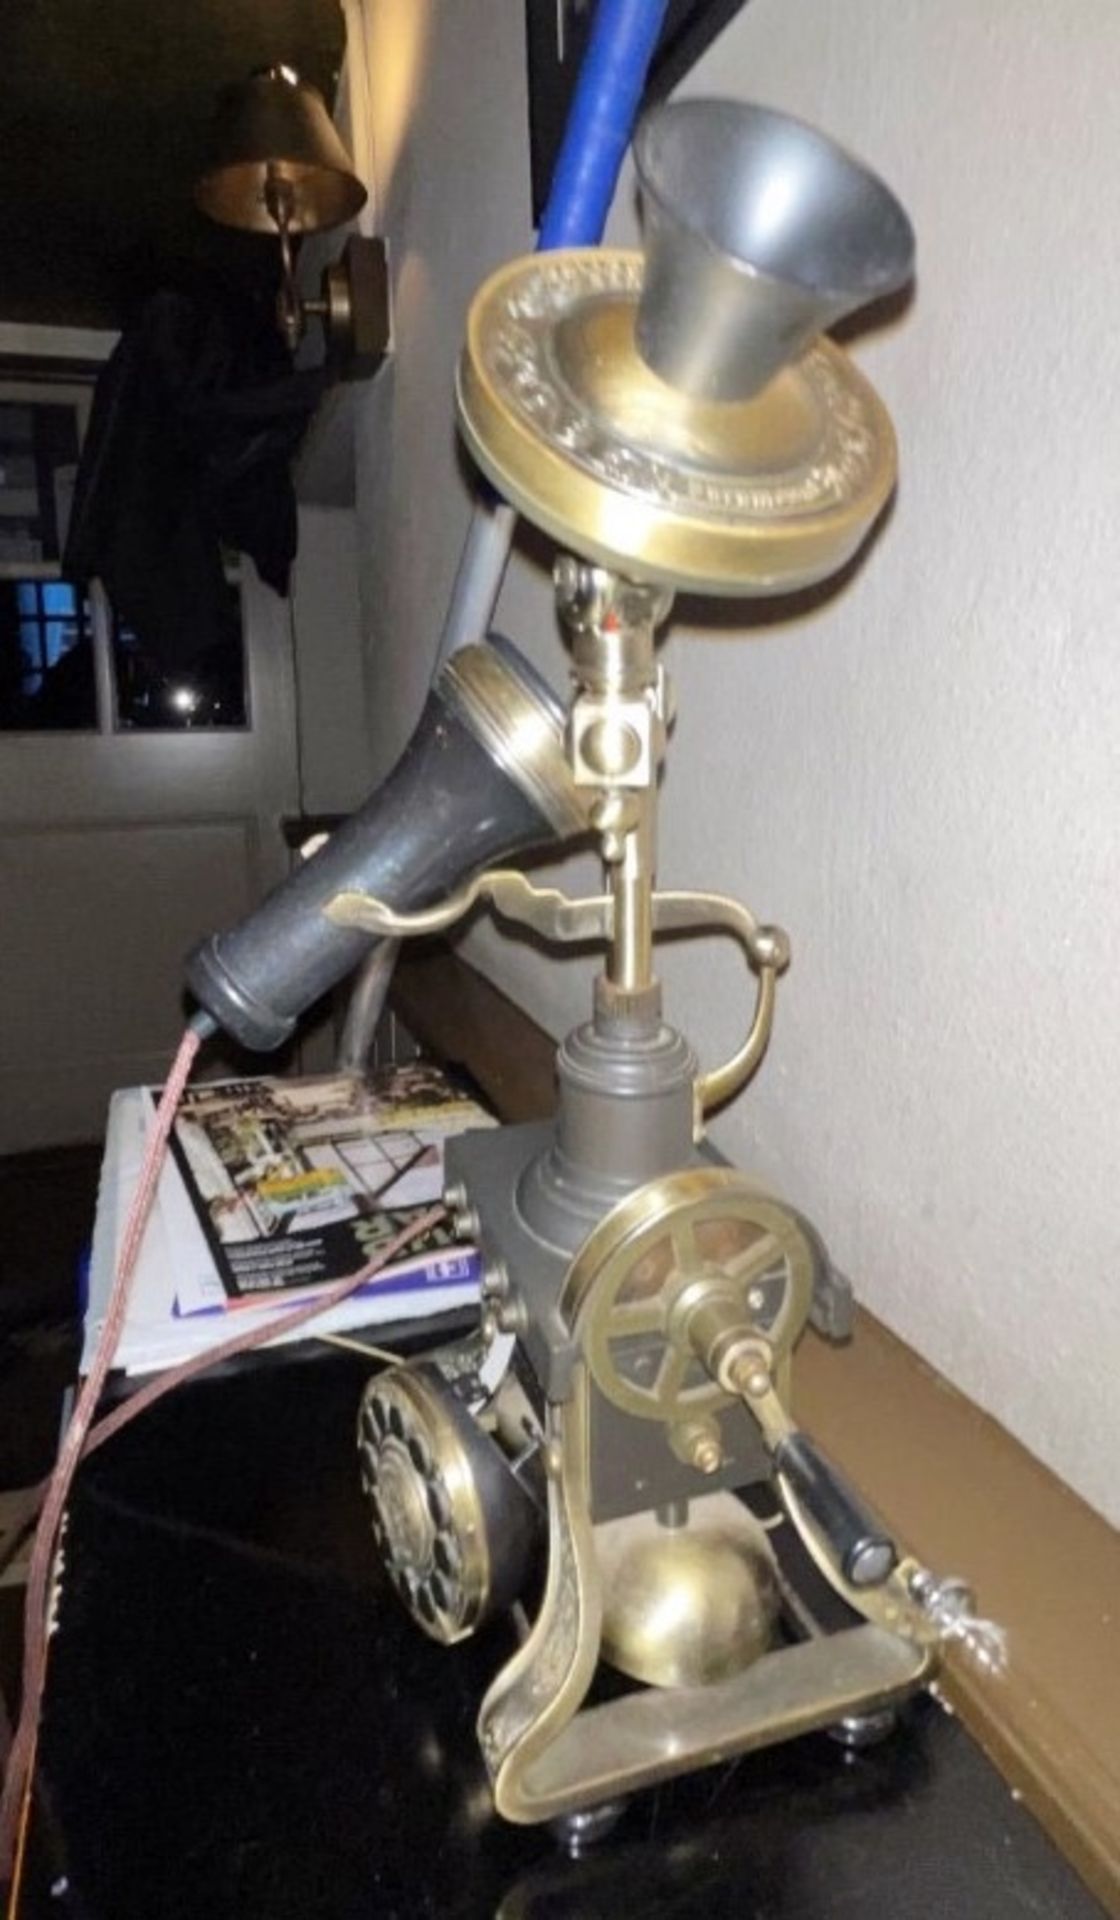 1 x Vintage Style Metal Candlestick Telephone with Line Cord - CL909 - Location: London, W1U This - Image 4 of 6